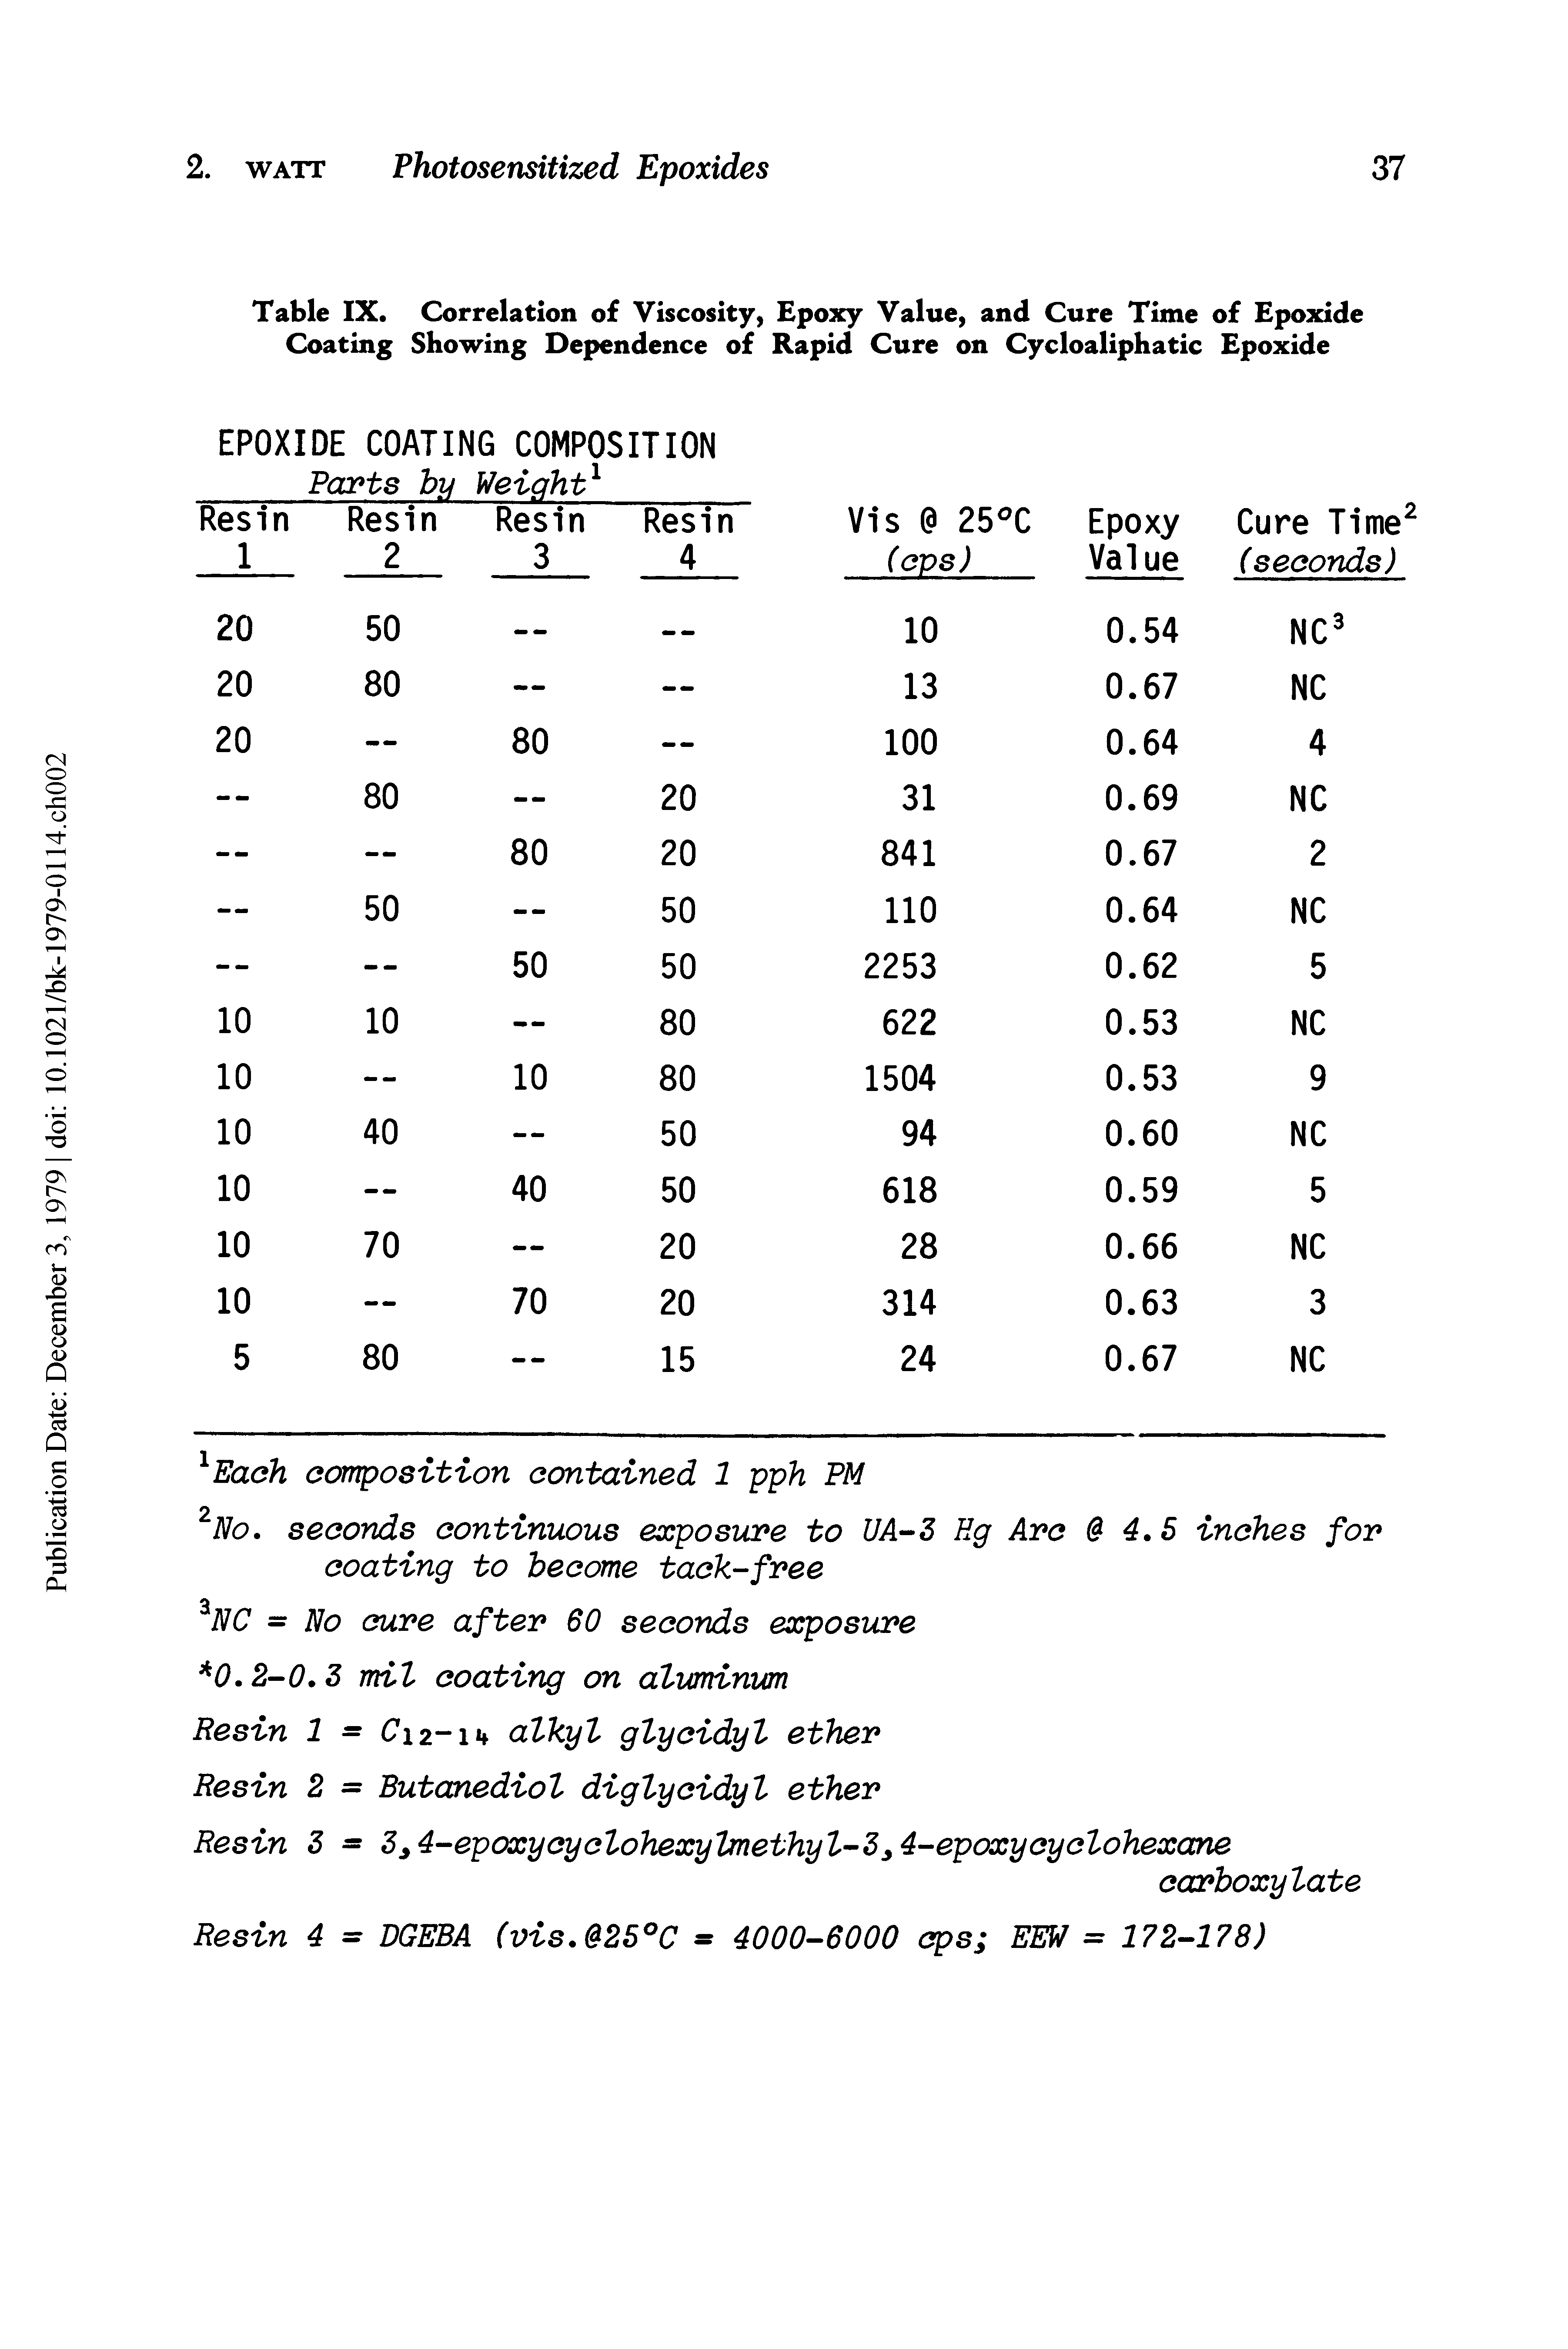 Table IX. Correlation of Viscosity, Epoxy Value, and Cure Time of Epoxide Coating Showing Dependence of Rapid Cure on Cycloaliphatic Epoxide...